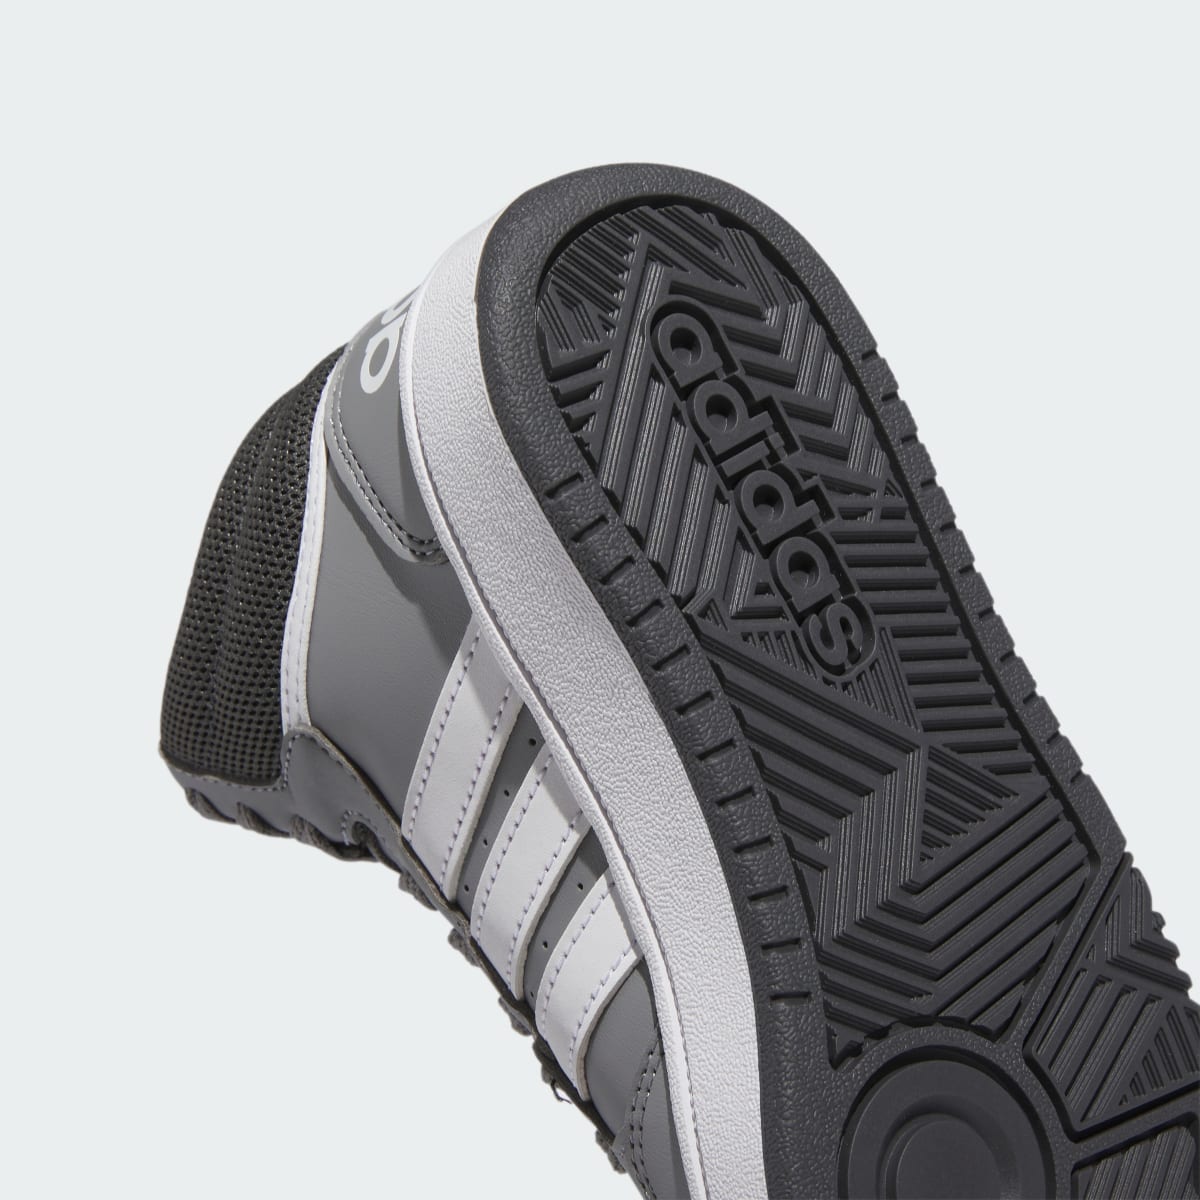 Adidas Hoops Mid Shoes. 10